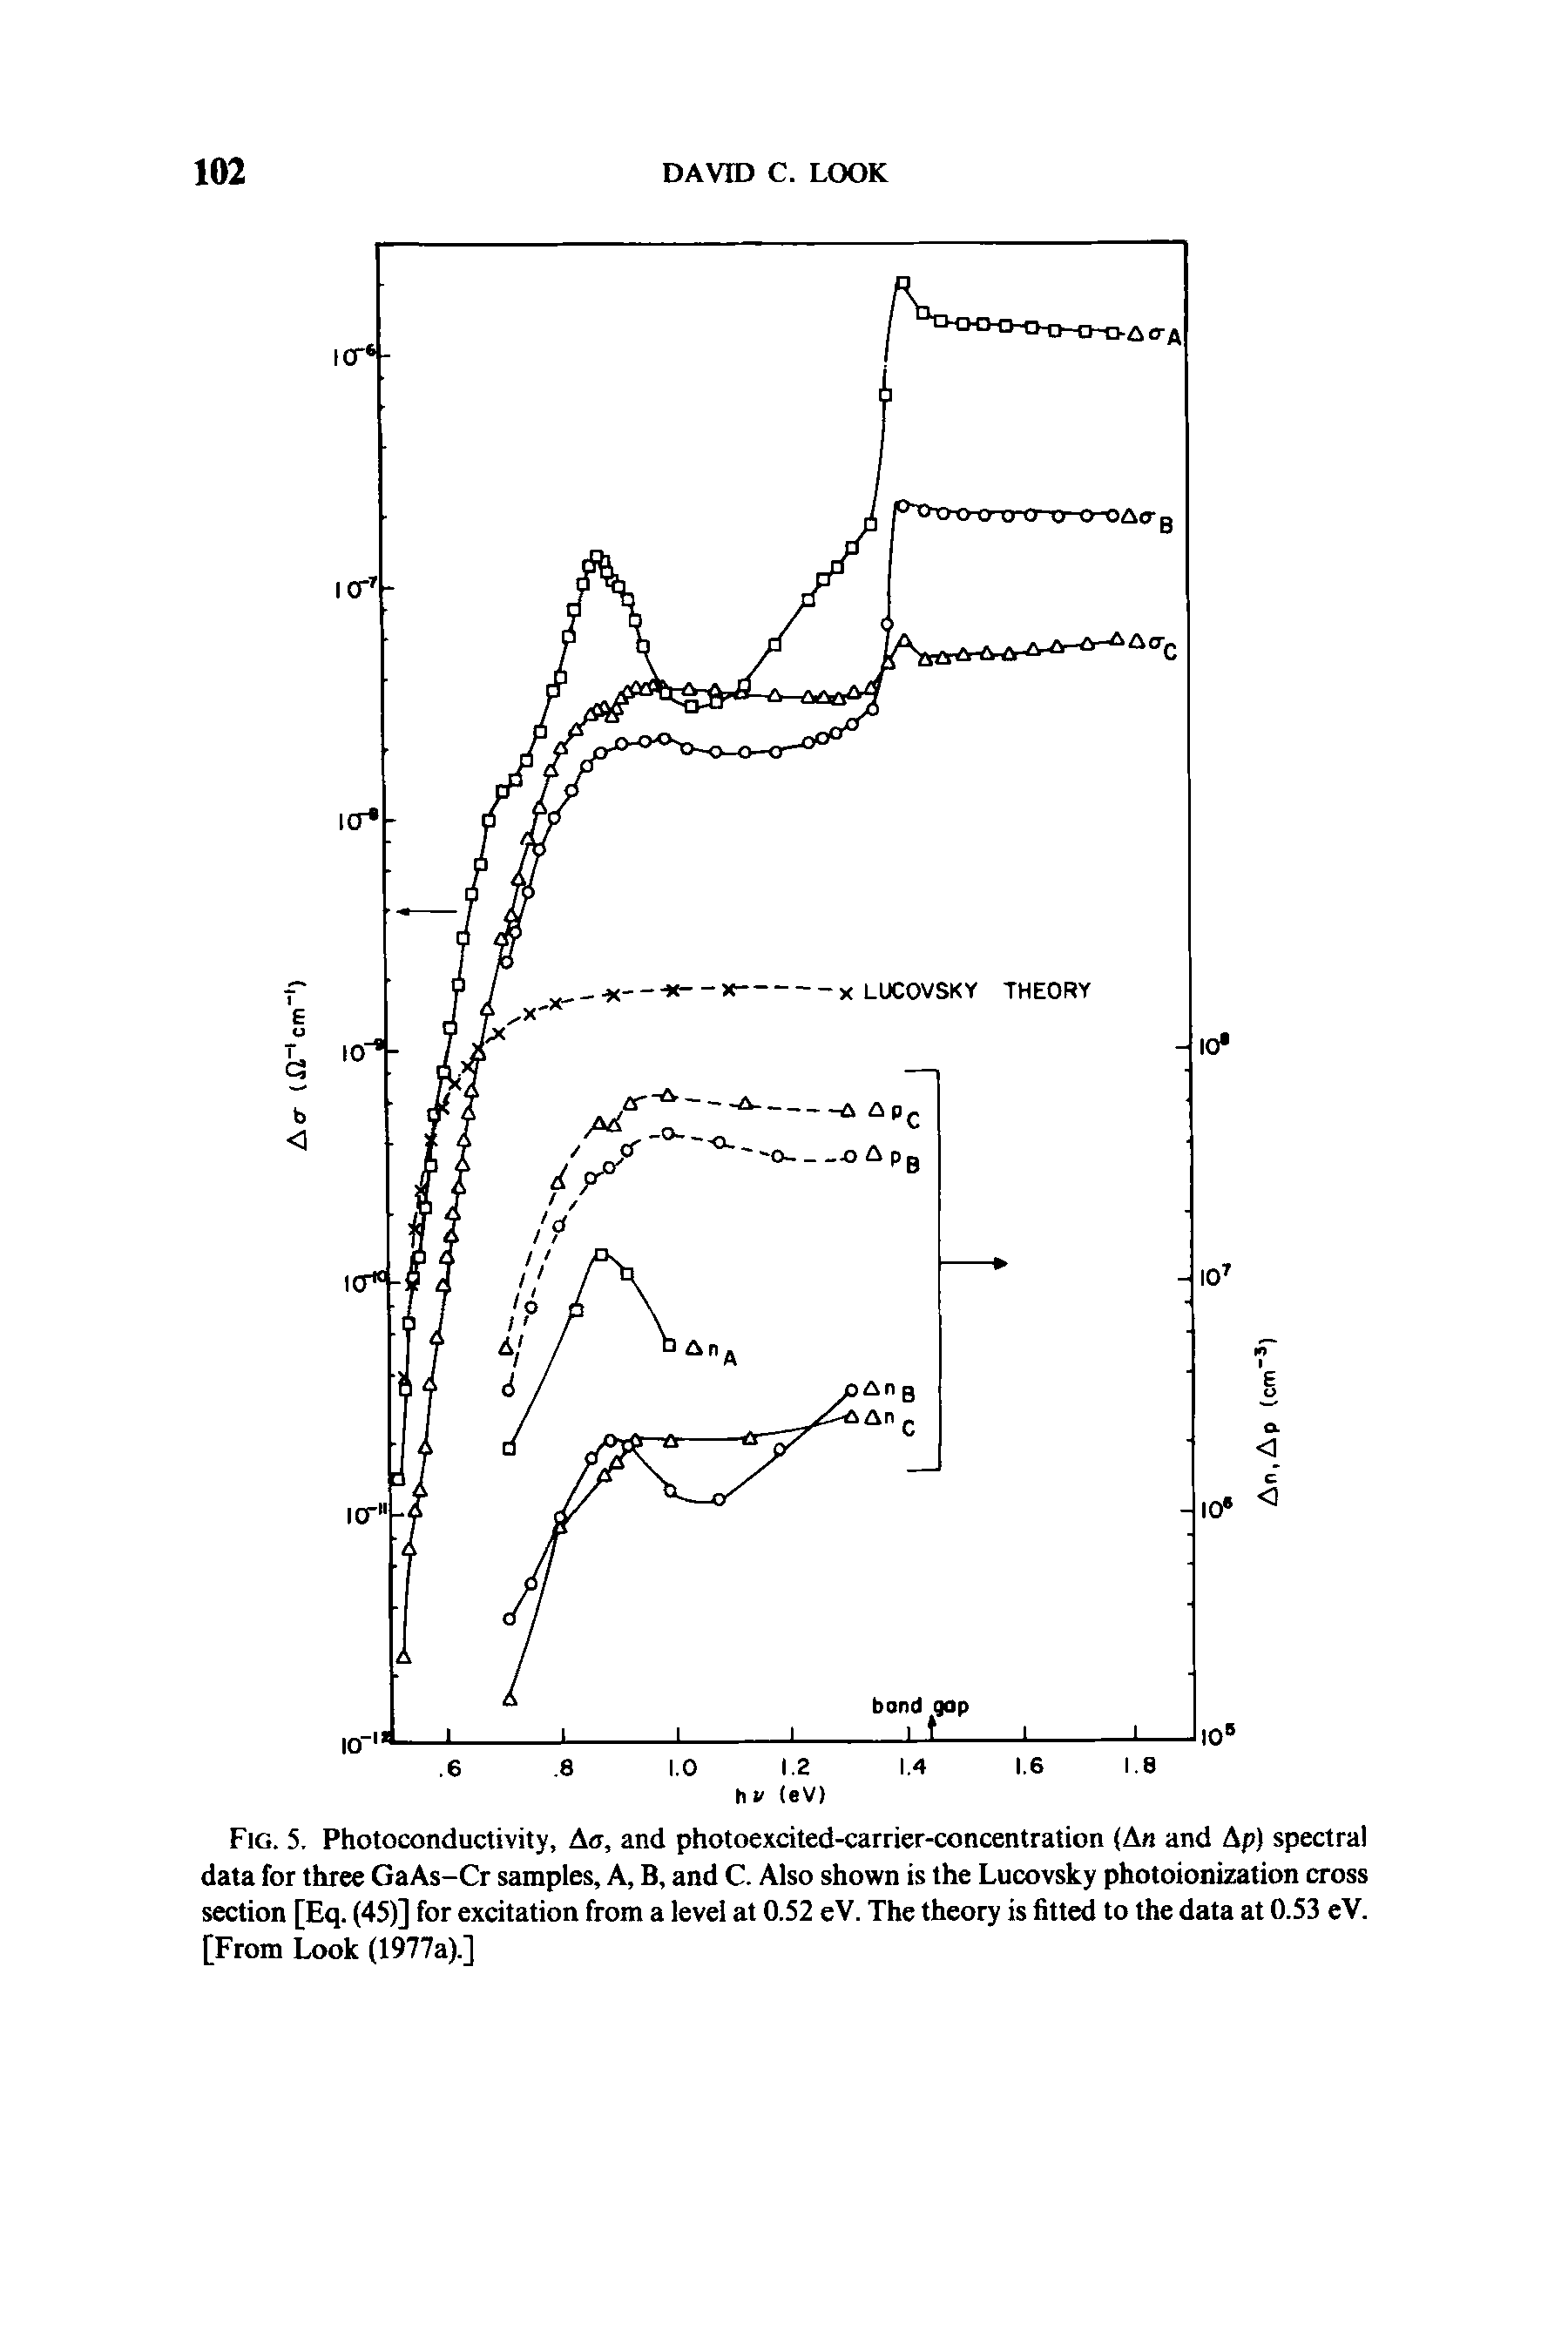 Fig. 5. Photoconductivity, a, and photoexcited-carrier-concentration (An and Ap) spectral data for three GaAs-Cr samples, A, B, and C. Also shown is the Lucovsky photoionization cross section [Eq. (45)] for excitation from a level at 0.52 eV. The theory is fitted to the data at 0.53 eV. [From Look (1977a).]...